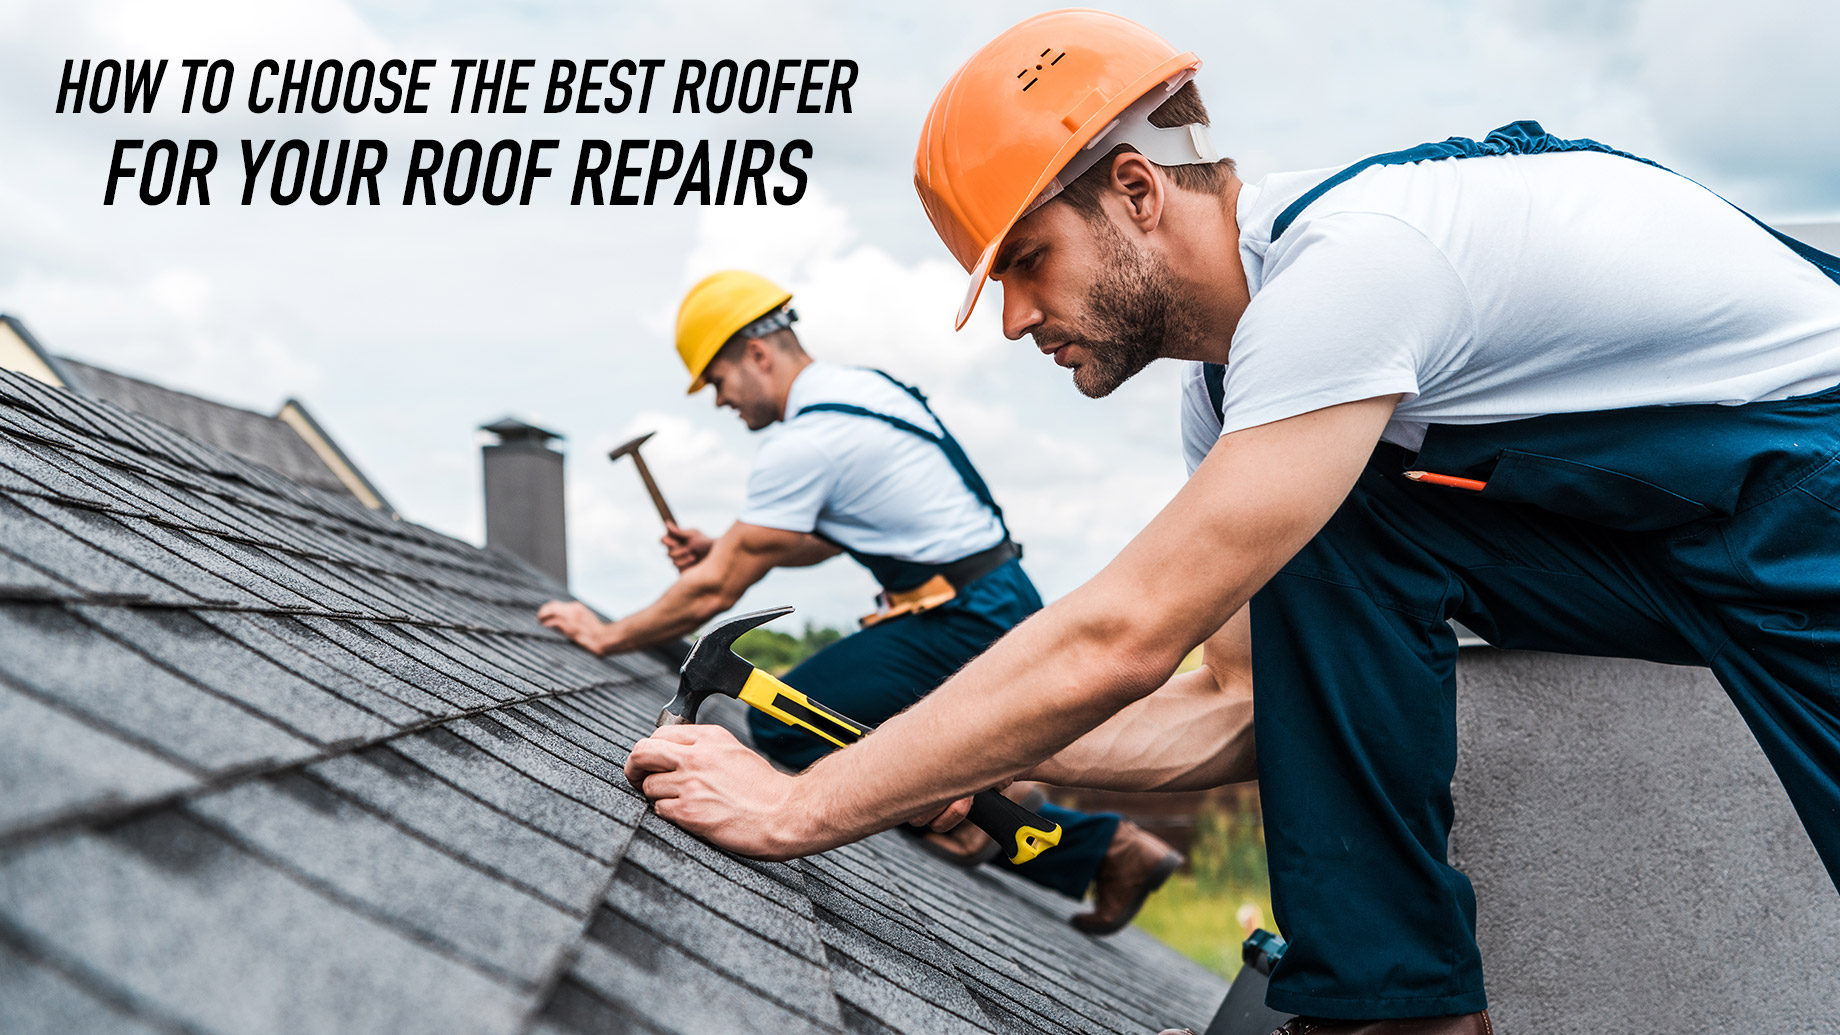 How to Choose the Best Roofer For Your Roof Repairs